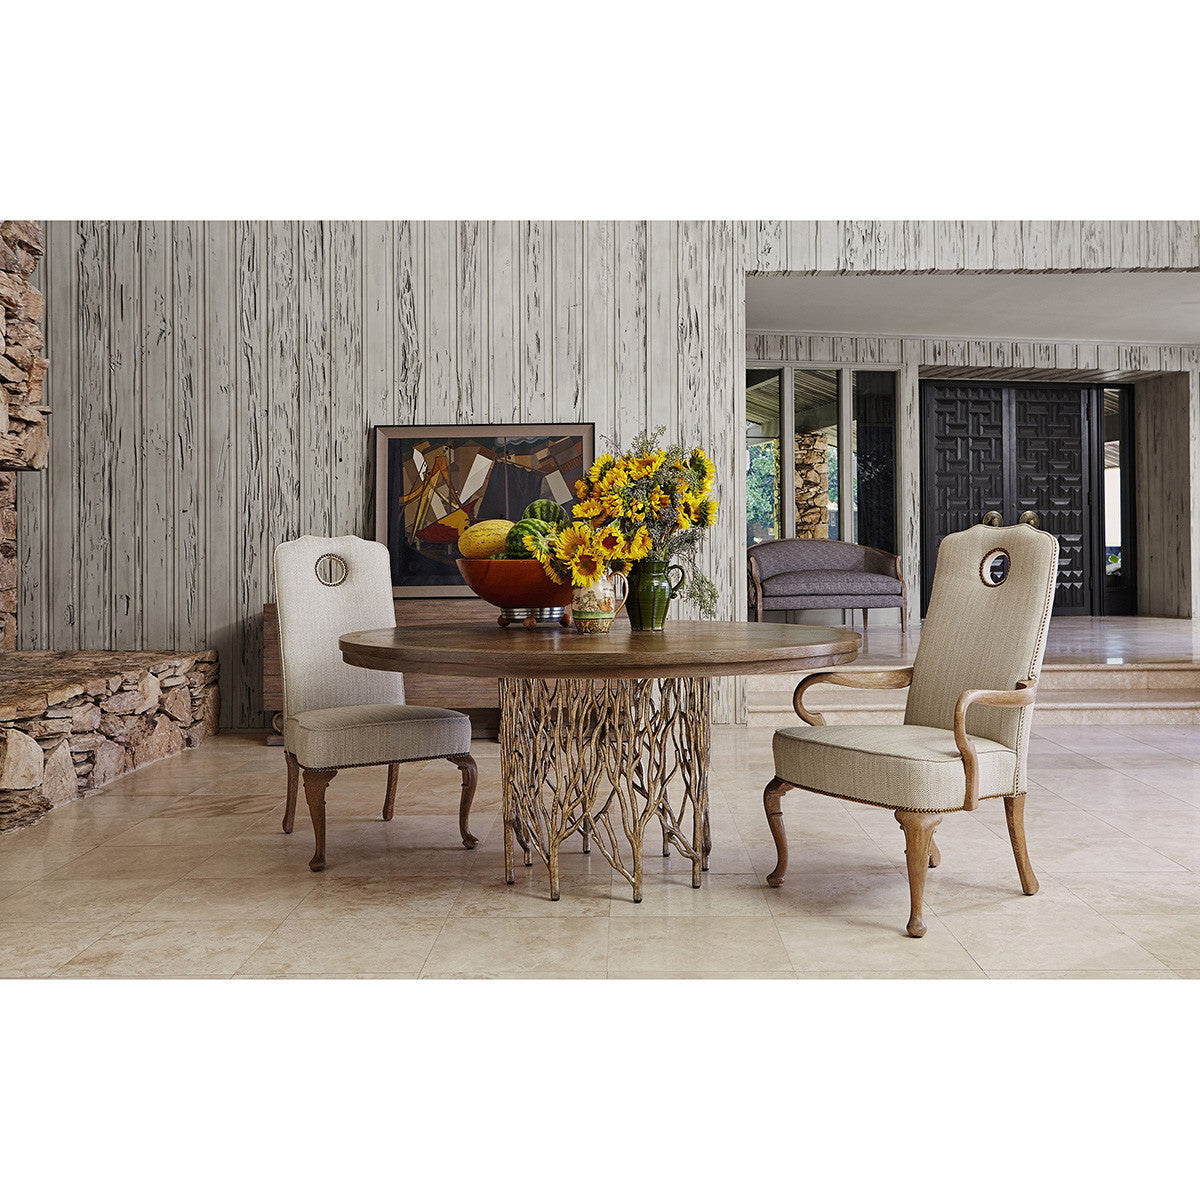 Ambella Home Forest Dining Table